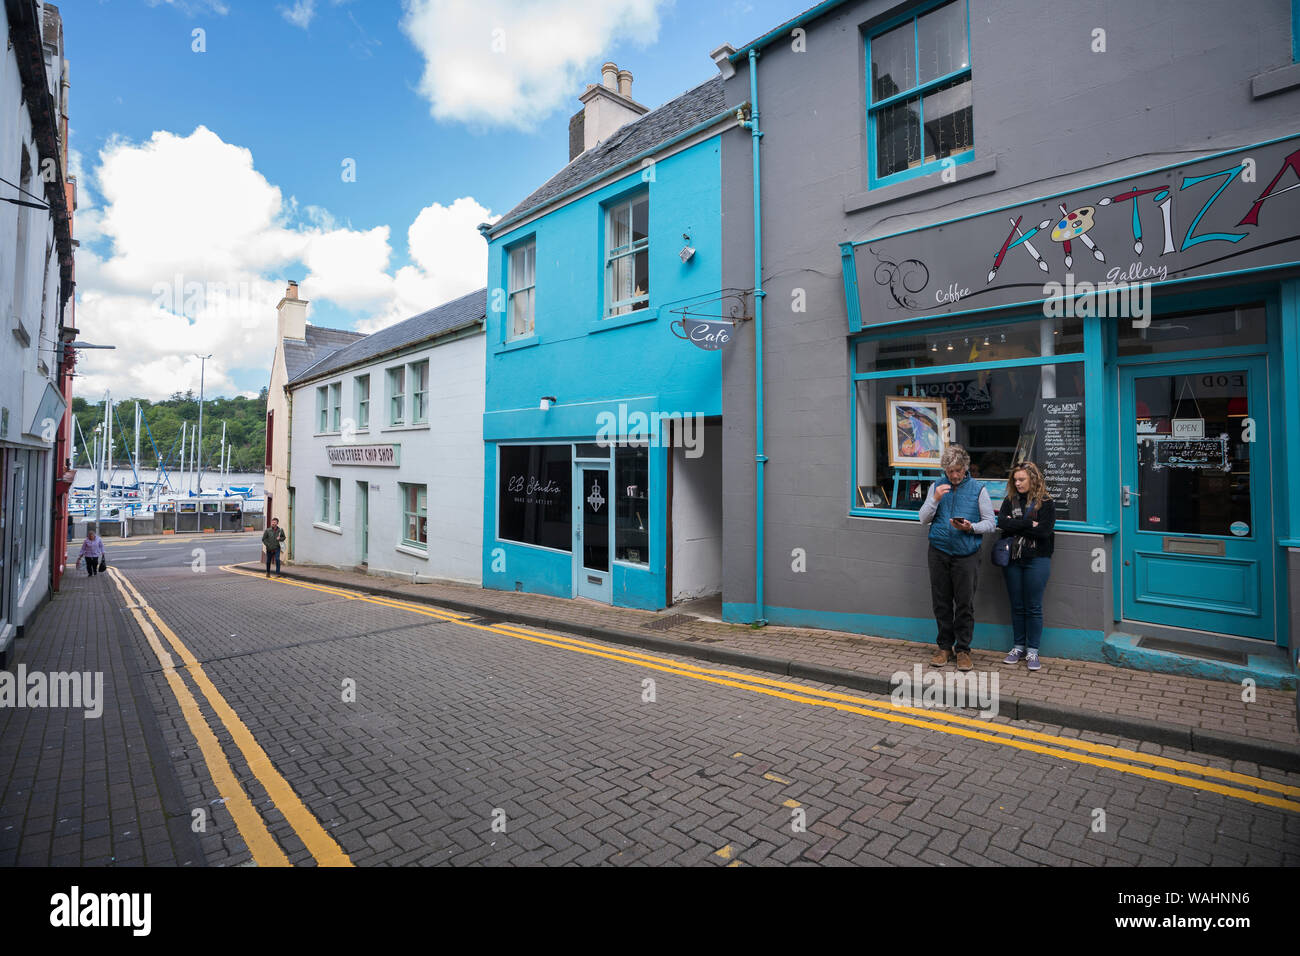 Street scene with shops and cafes in the main tourist area of Stornoway, the only city on the Isle of Lewis, Scotland, Outer Hebrides, UK Stock Photo